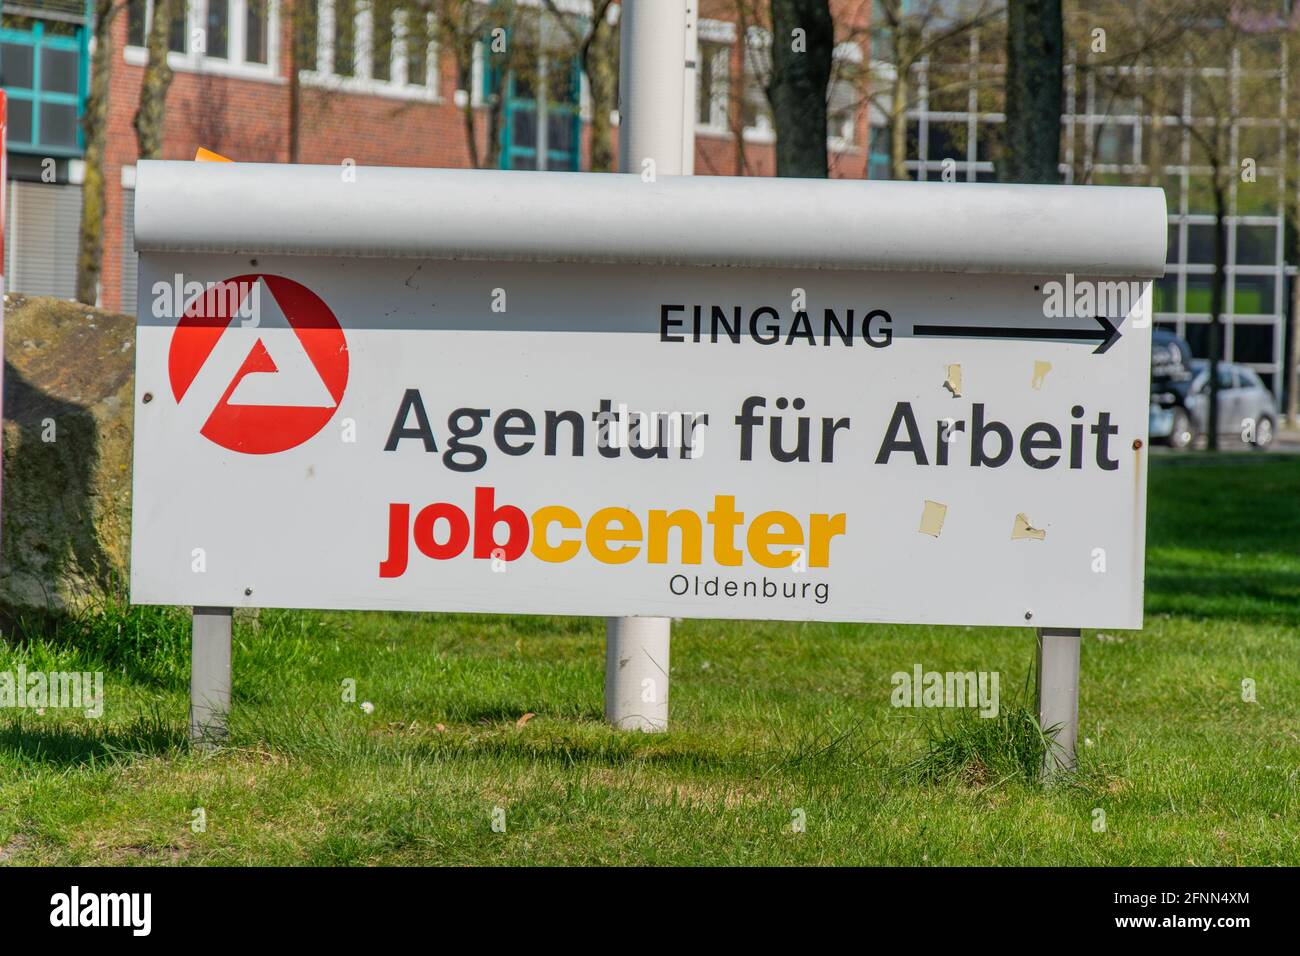 Jobcenter And Employment Agency In Oldenburg. Stock Photo